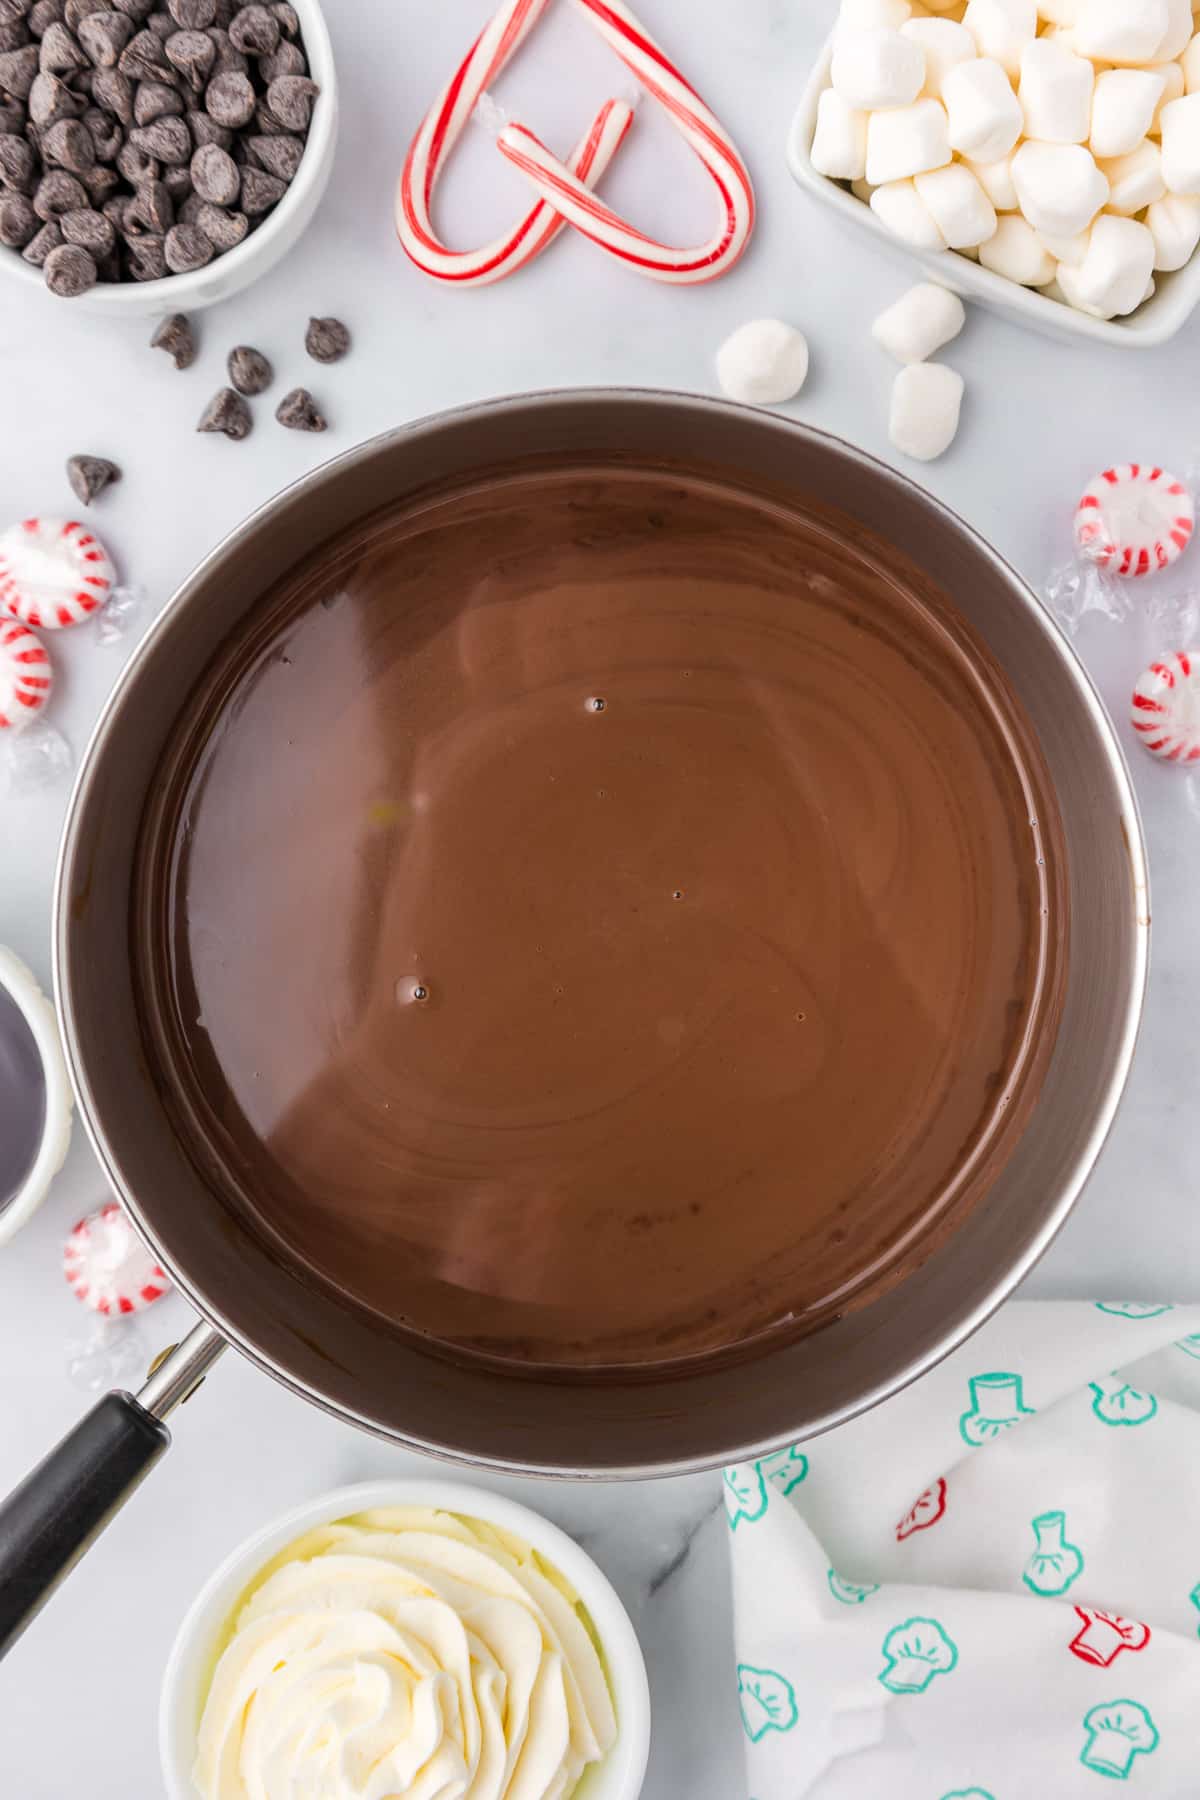 Hot chocolate in a pan with candy canes, whipped cream and marshmallows on the counter nearby.